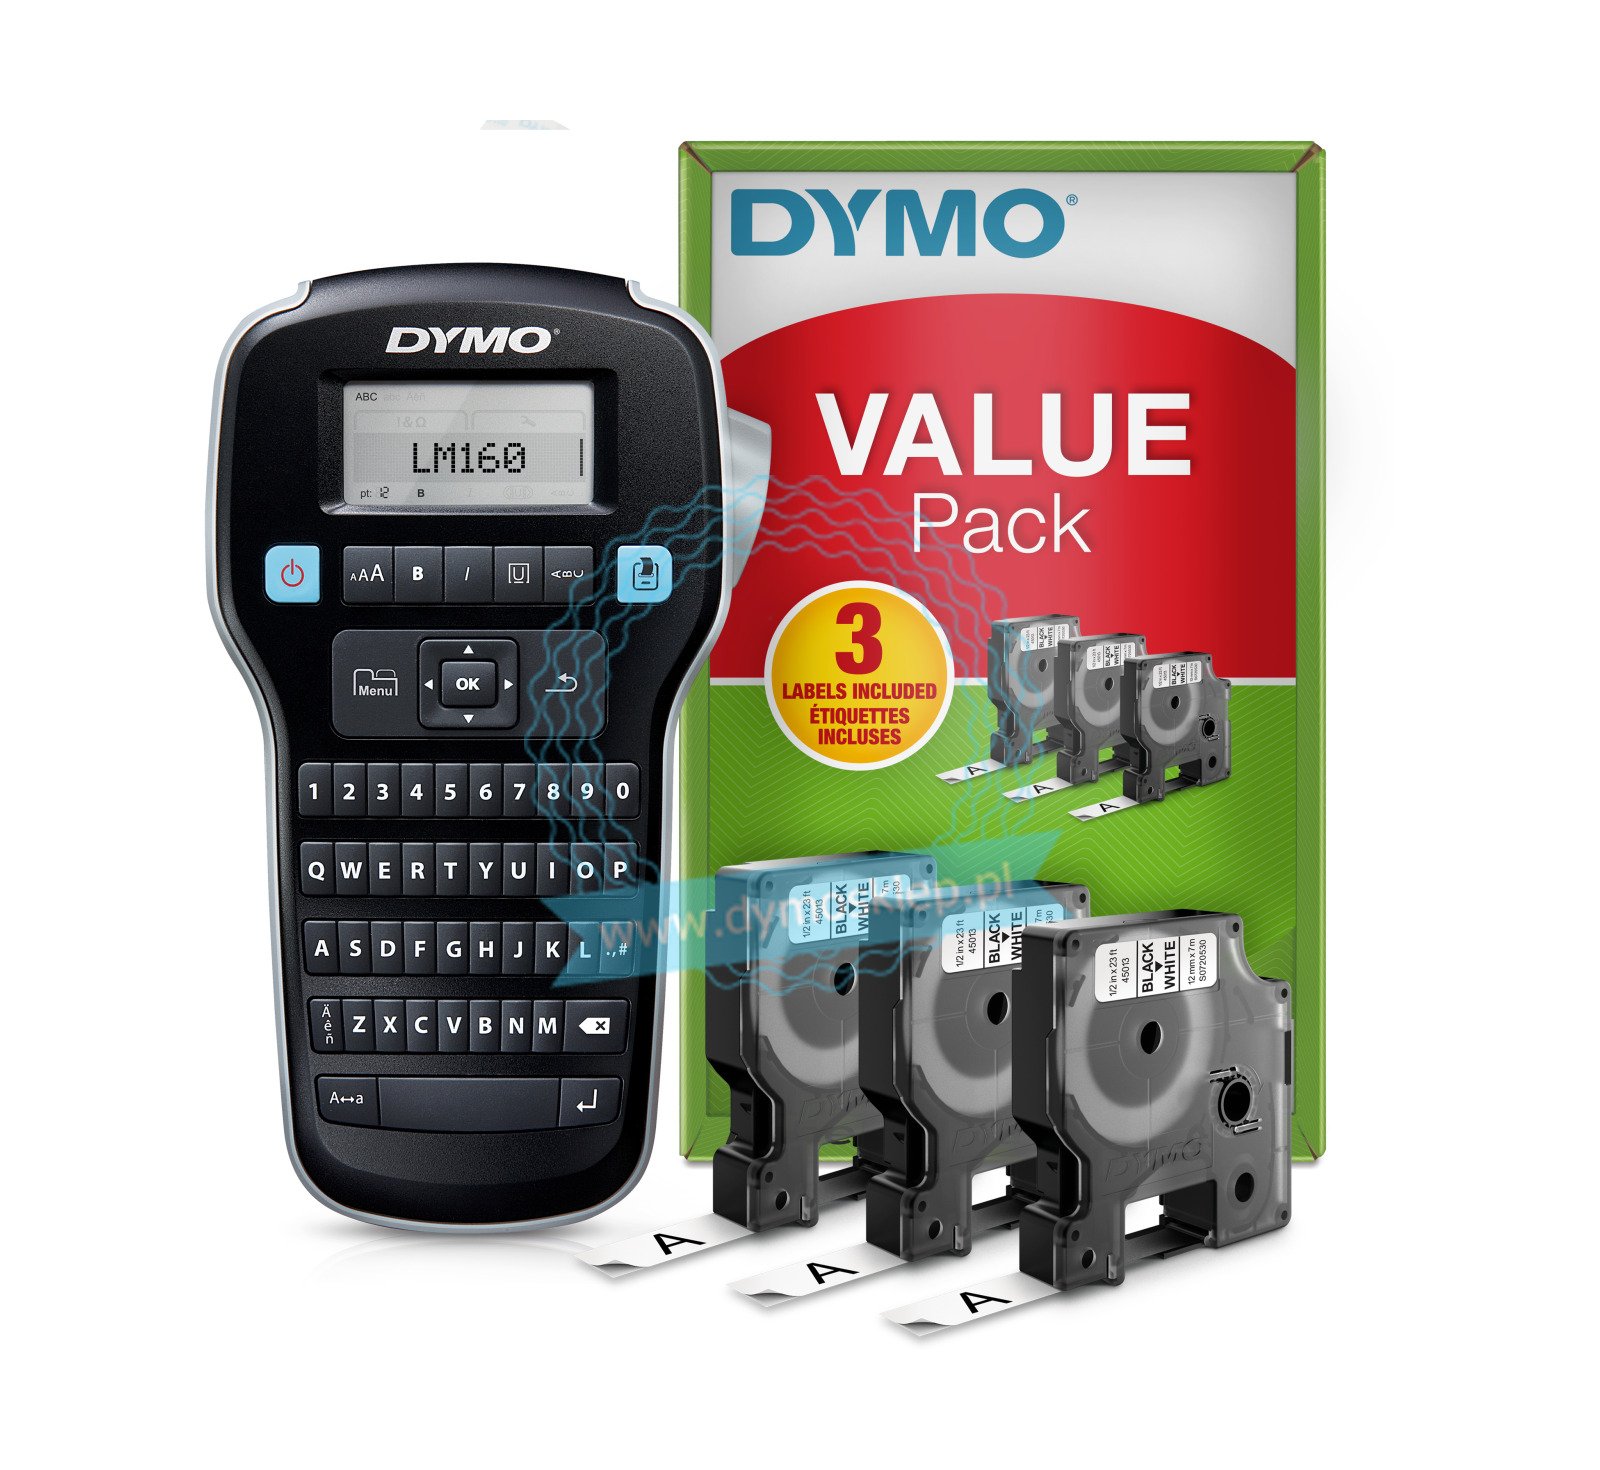 Dymo LabelManager 160 Value Pack Label Printer 2142267